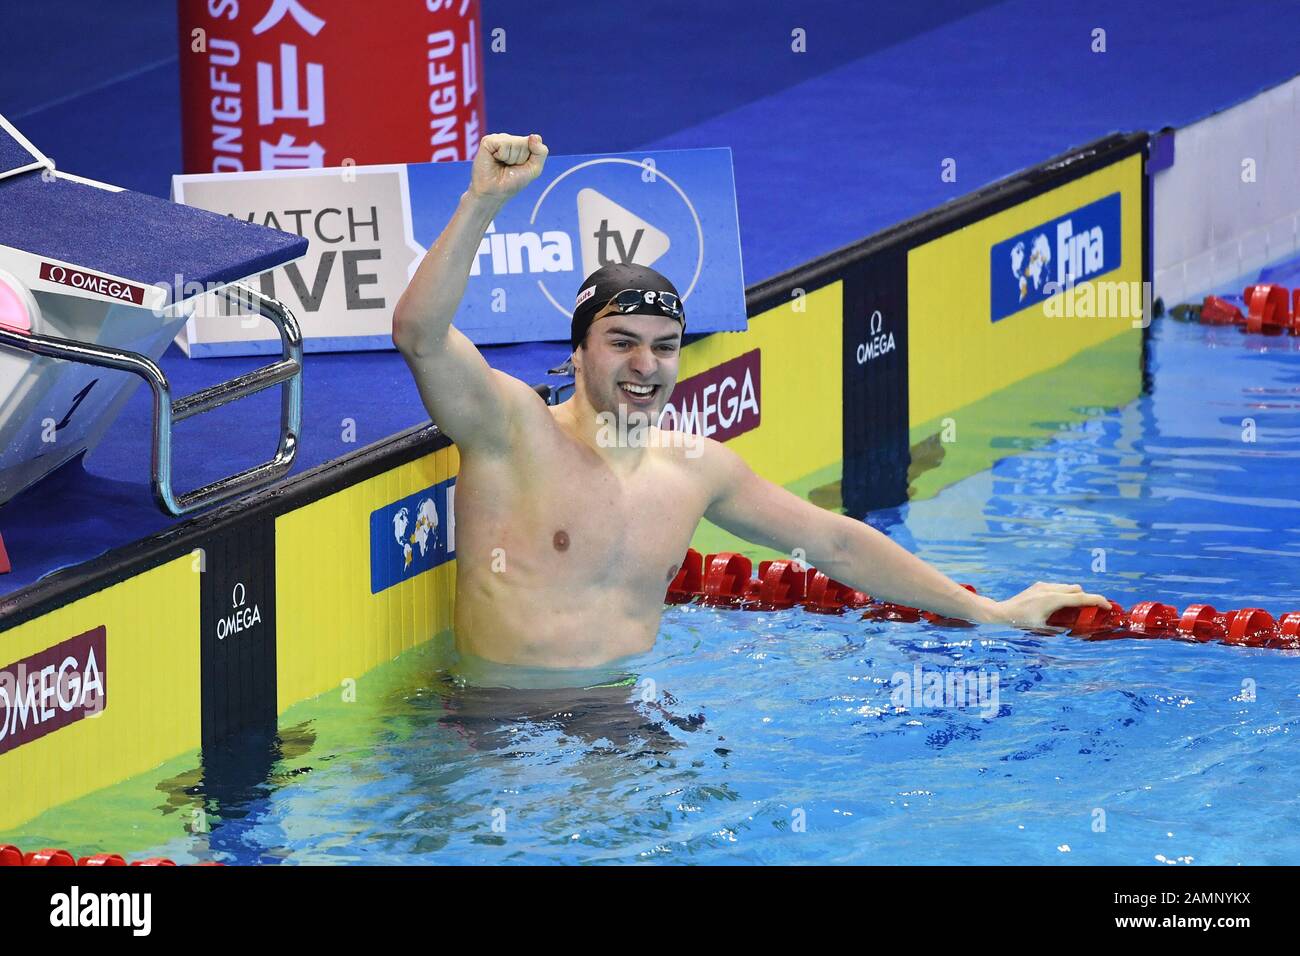 Shenzhen, China's Guangdong province. 14th Jan, 2020. Kamminga Arno of the  Netherlands celebrates after winning the men's 100m breaststroke final of FINA  Champions Swim Series 2020 in Shenzhen, south China's Guangdong province,